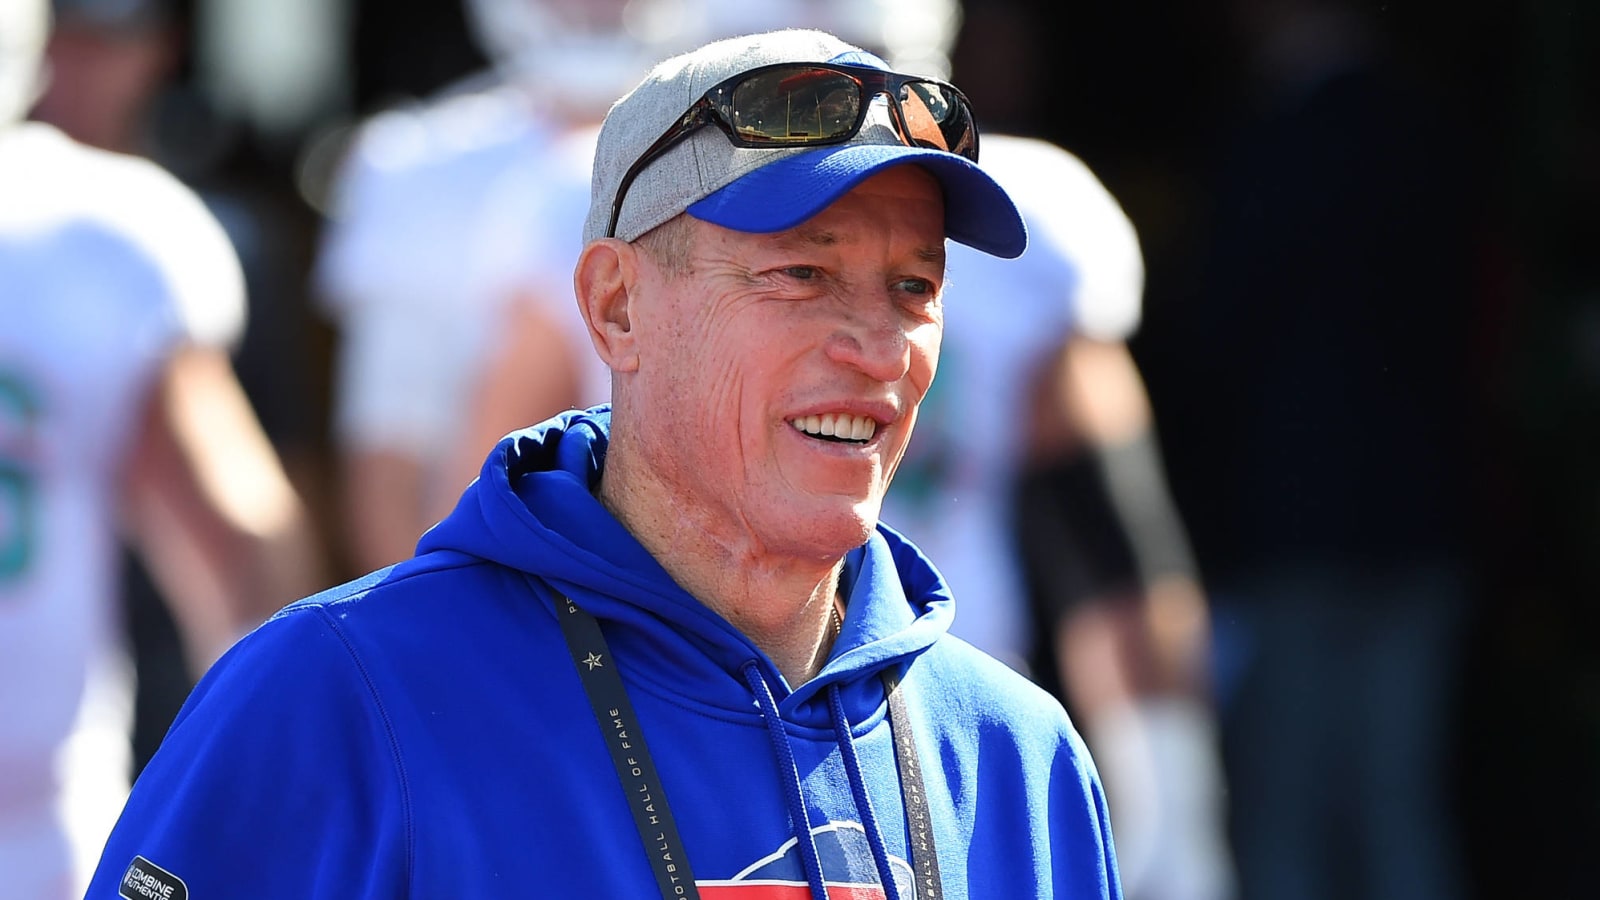 Watch: Jim Kelly intro to Bills-Cowboys game was something